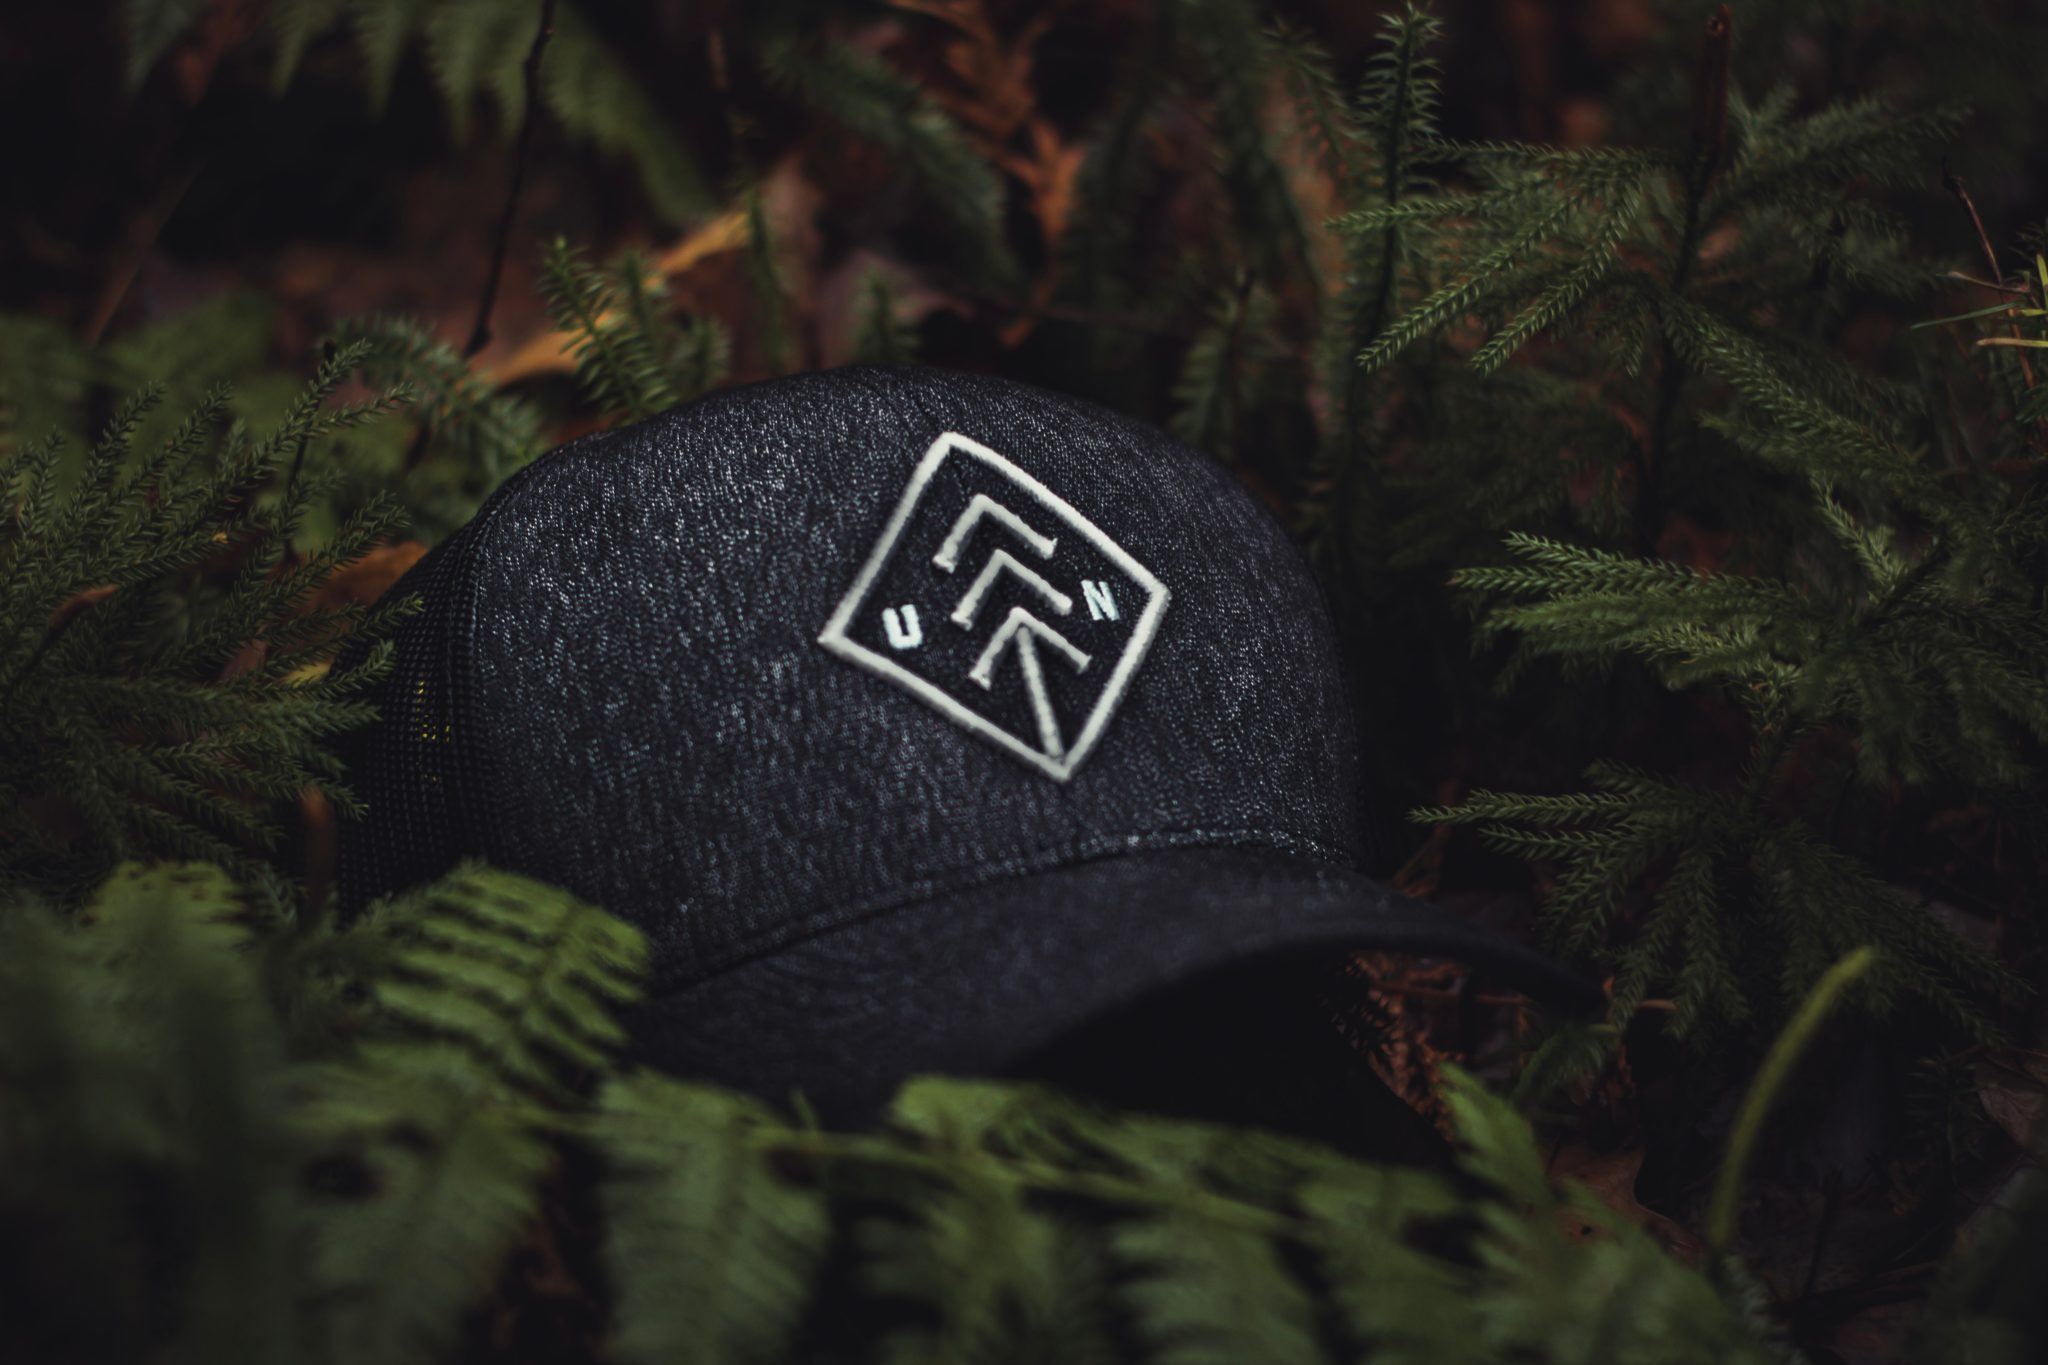 Branded caps and hats can go a long way with building relationships and creating loyalty with your brand.